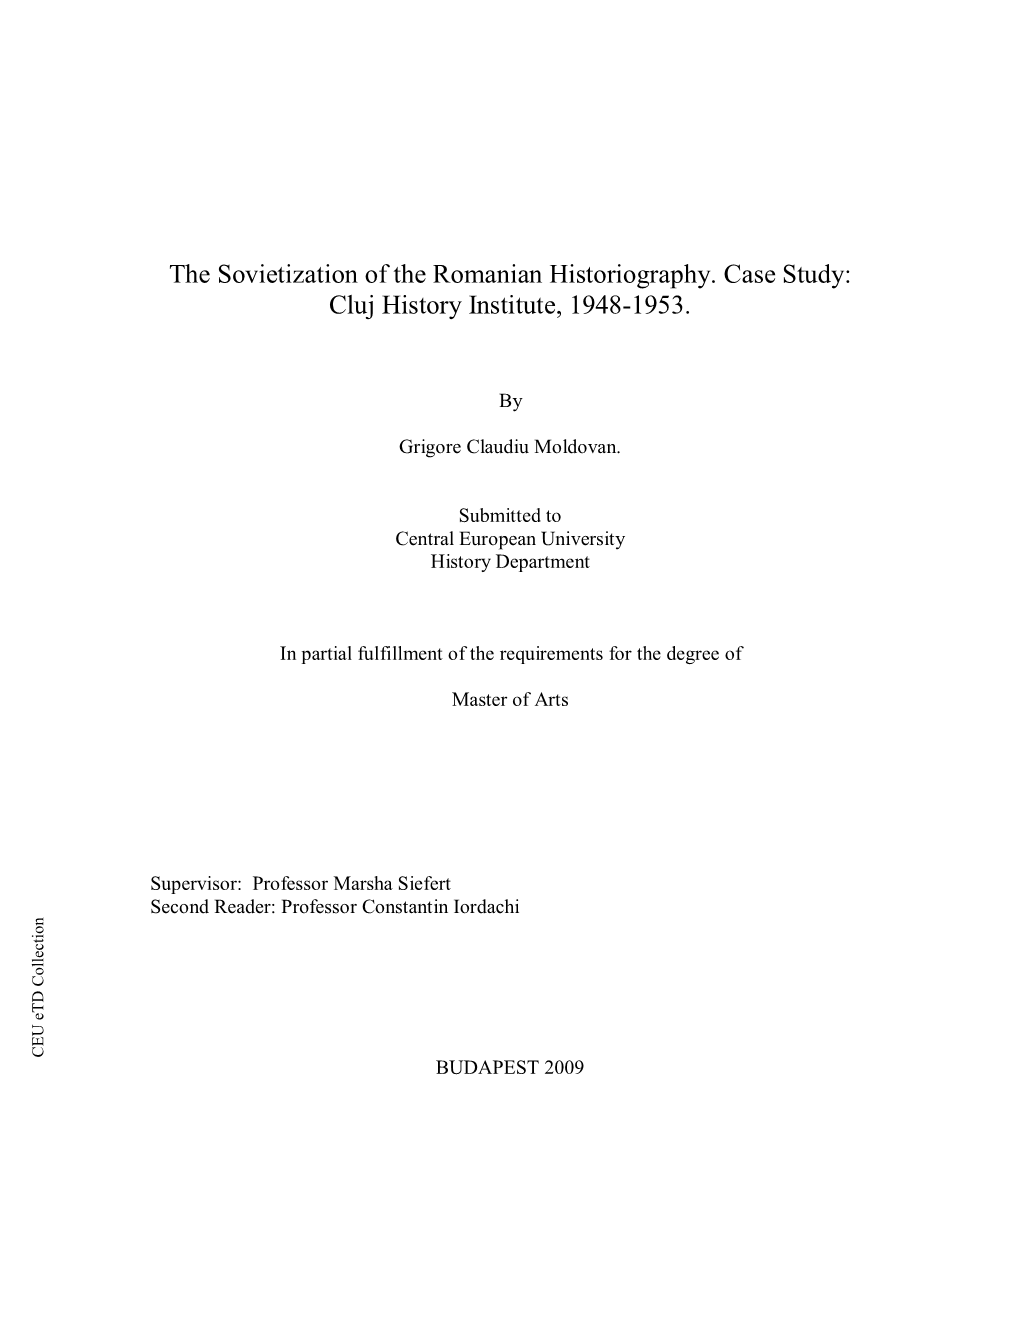 The Sovietization of the Romanian Historiography. Case Study: in Partial Fulfillment of the Requirements for the Degree of Cluj History Institute, 1948-1953